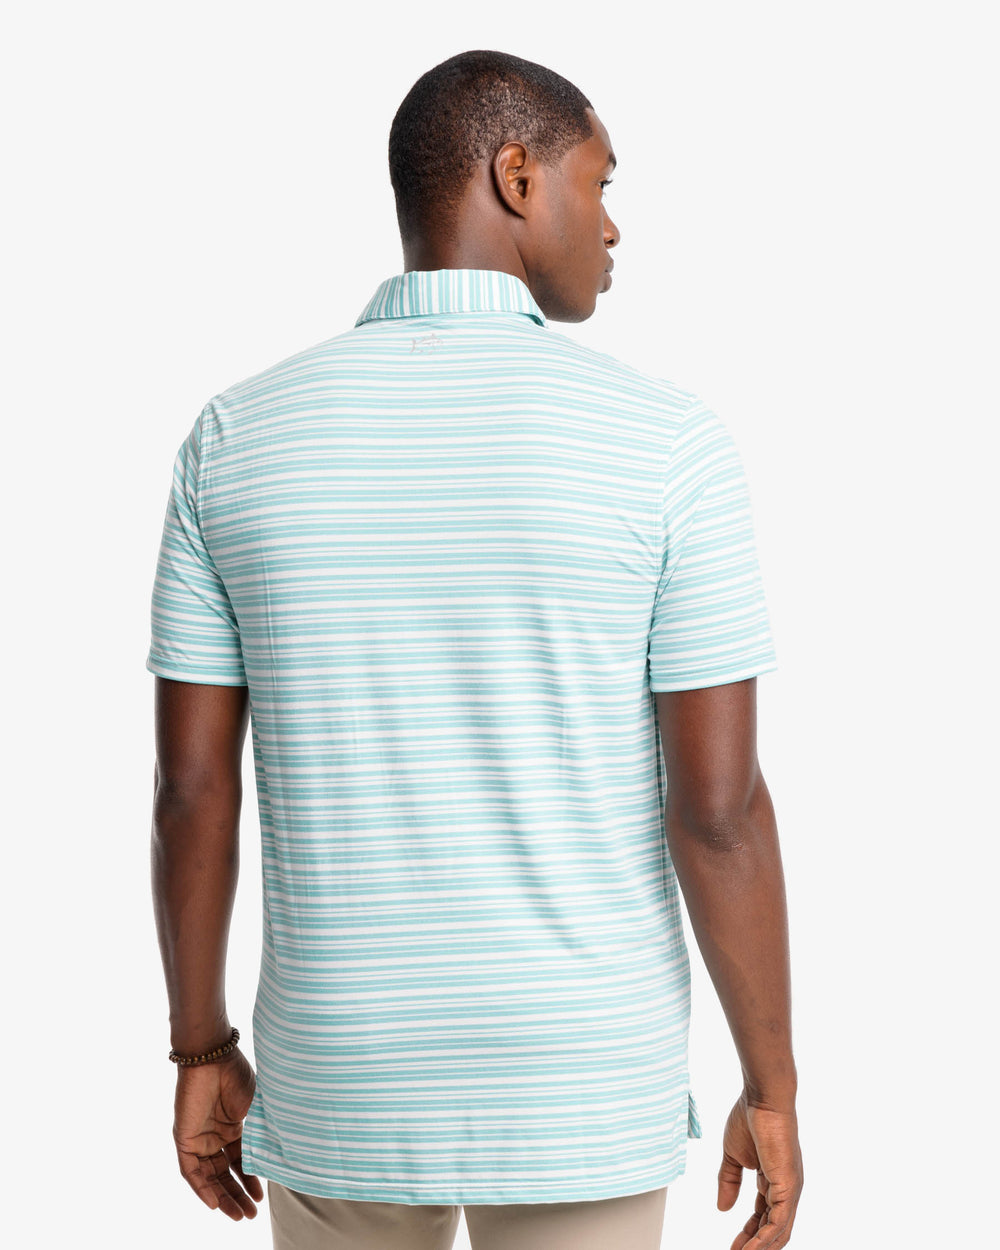 The back view of the Southern Tide Ryder Heather Bombay Striped Polo Shirt by Southern Tide - Heather Tidal Wave